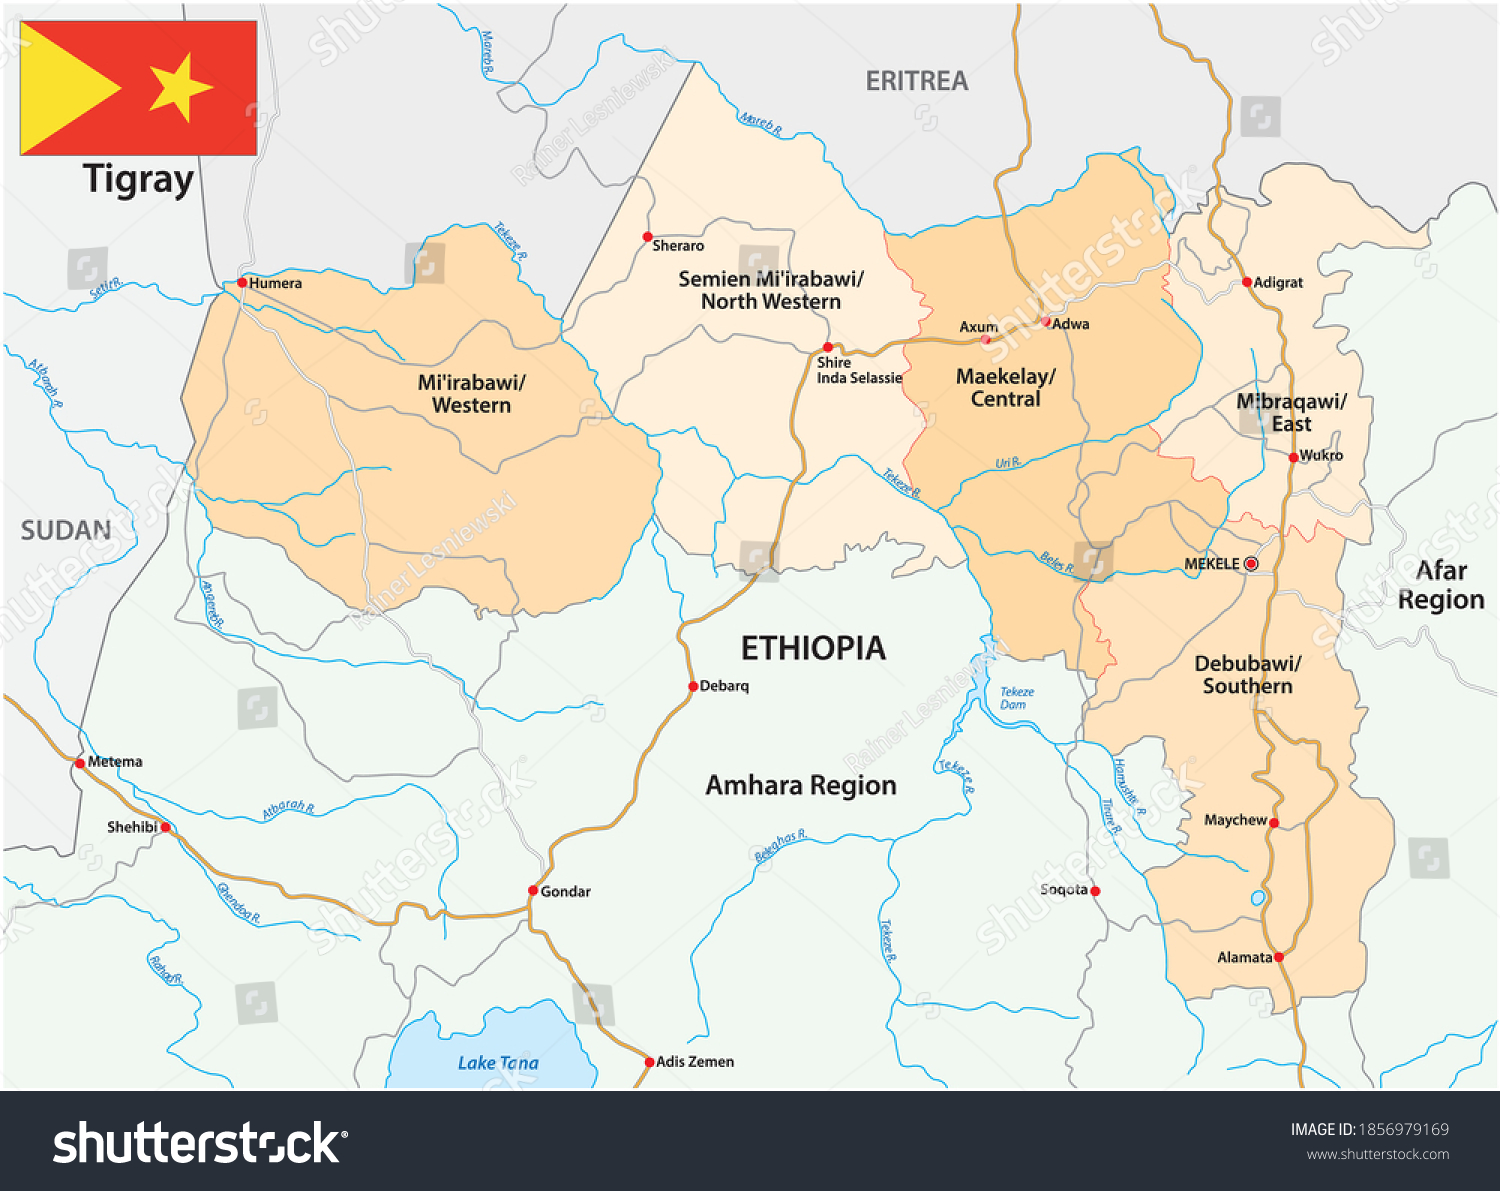 Old Map Of Tigray Road Administrative Vector Map Tigray Region Stock Vector (Royalty Free)  1856979169 | Shutterstock